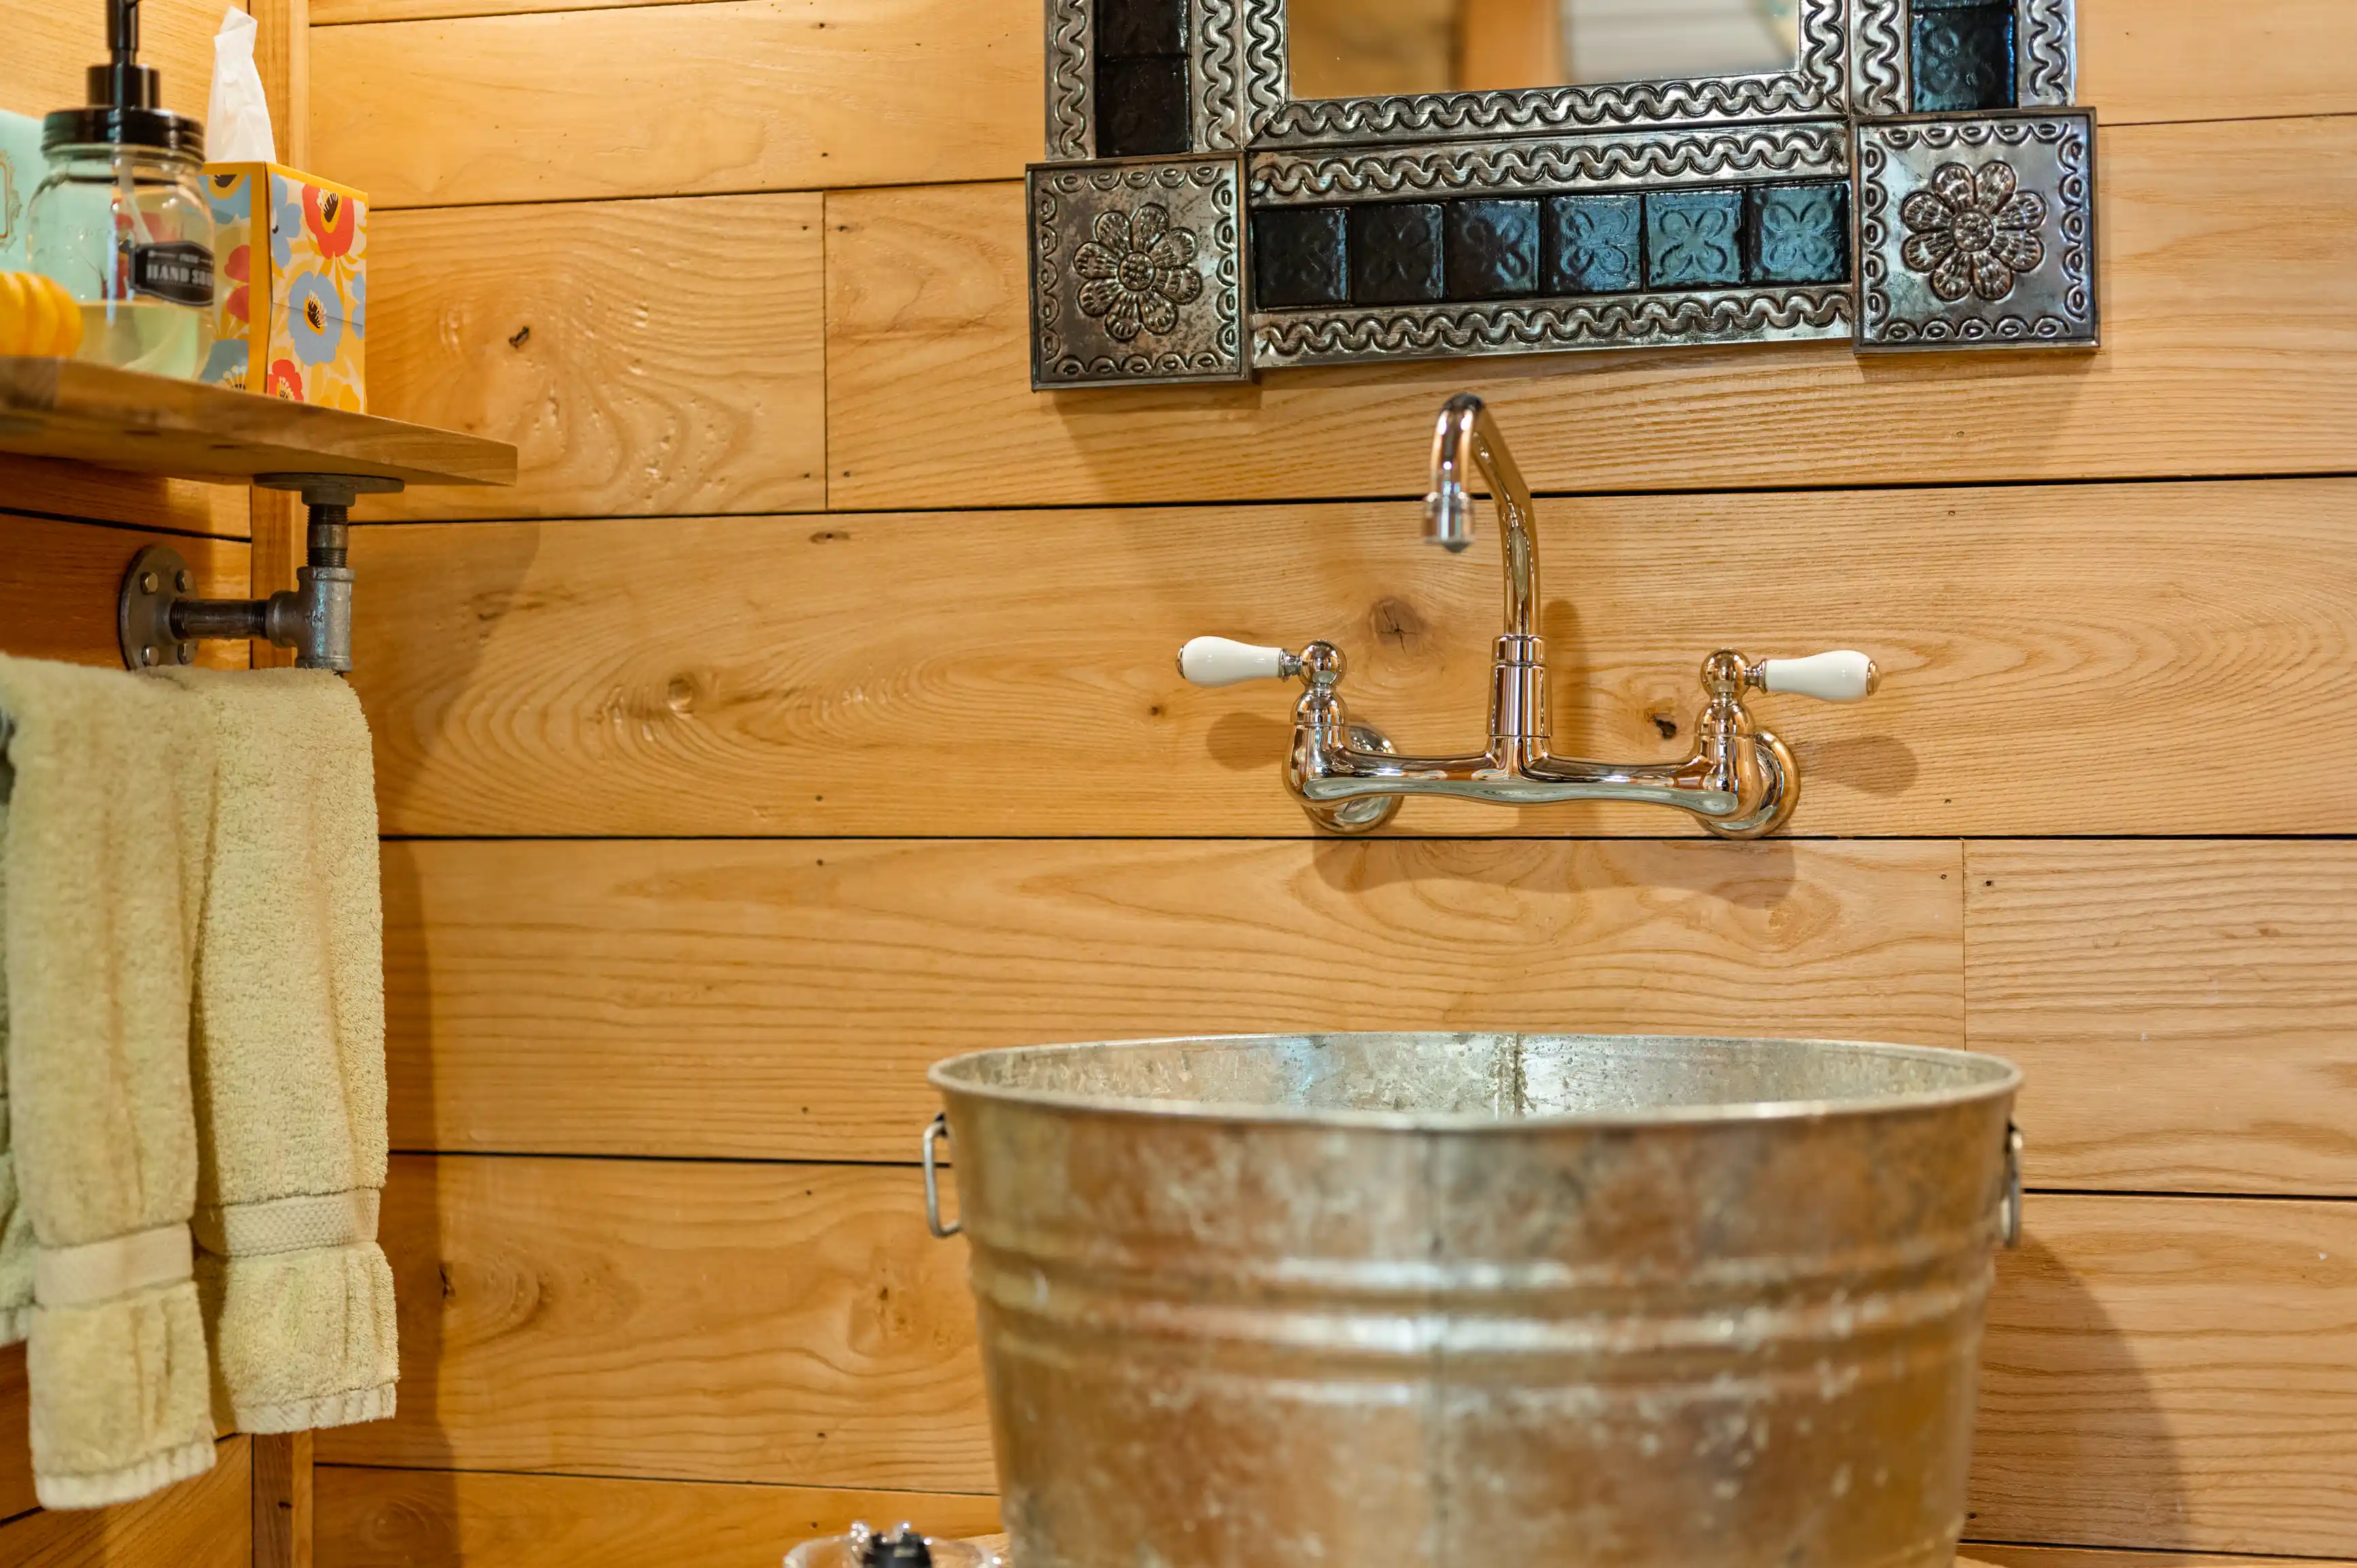 Rustic bathroom interior with a galvanized bucket sink, wall-mounted faucet, wooden walls and a mirror with decorative metal frame.